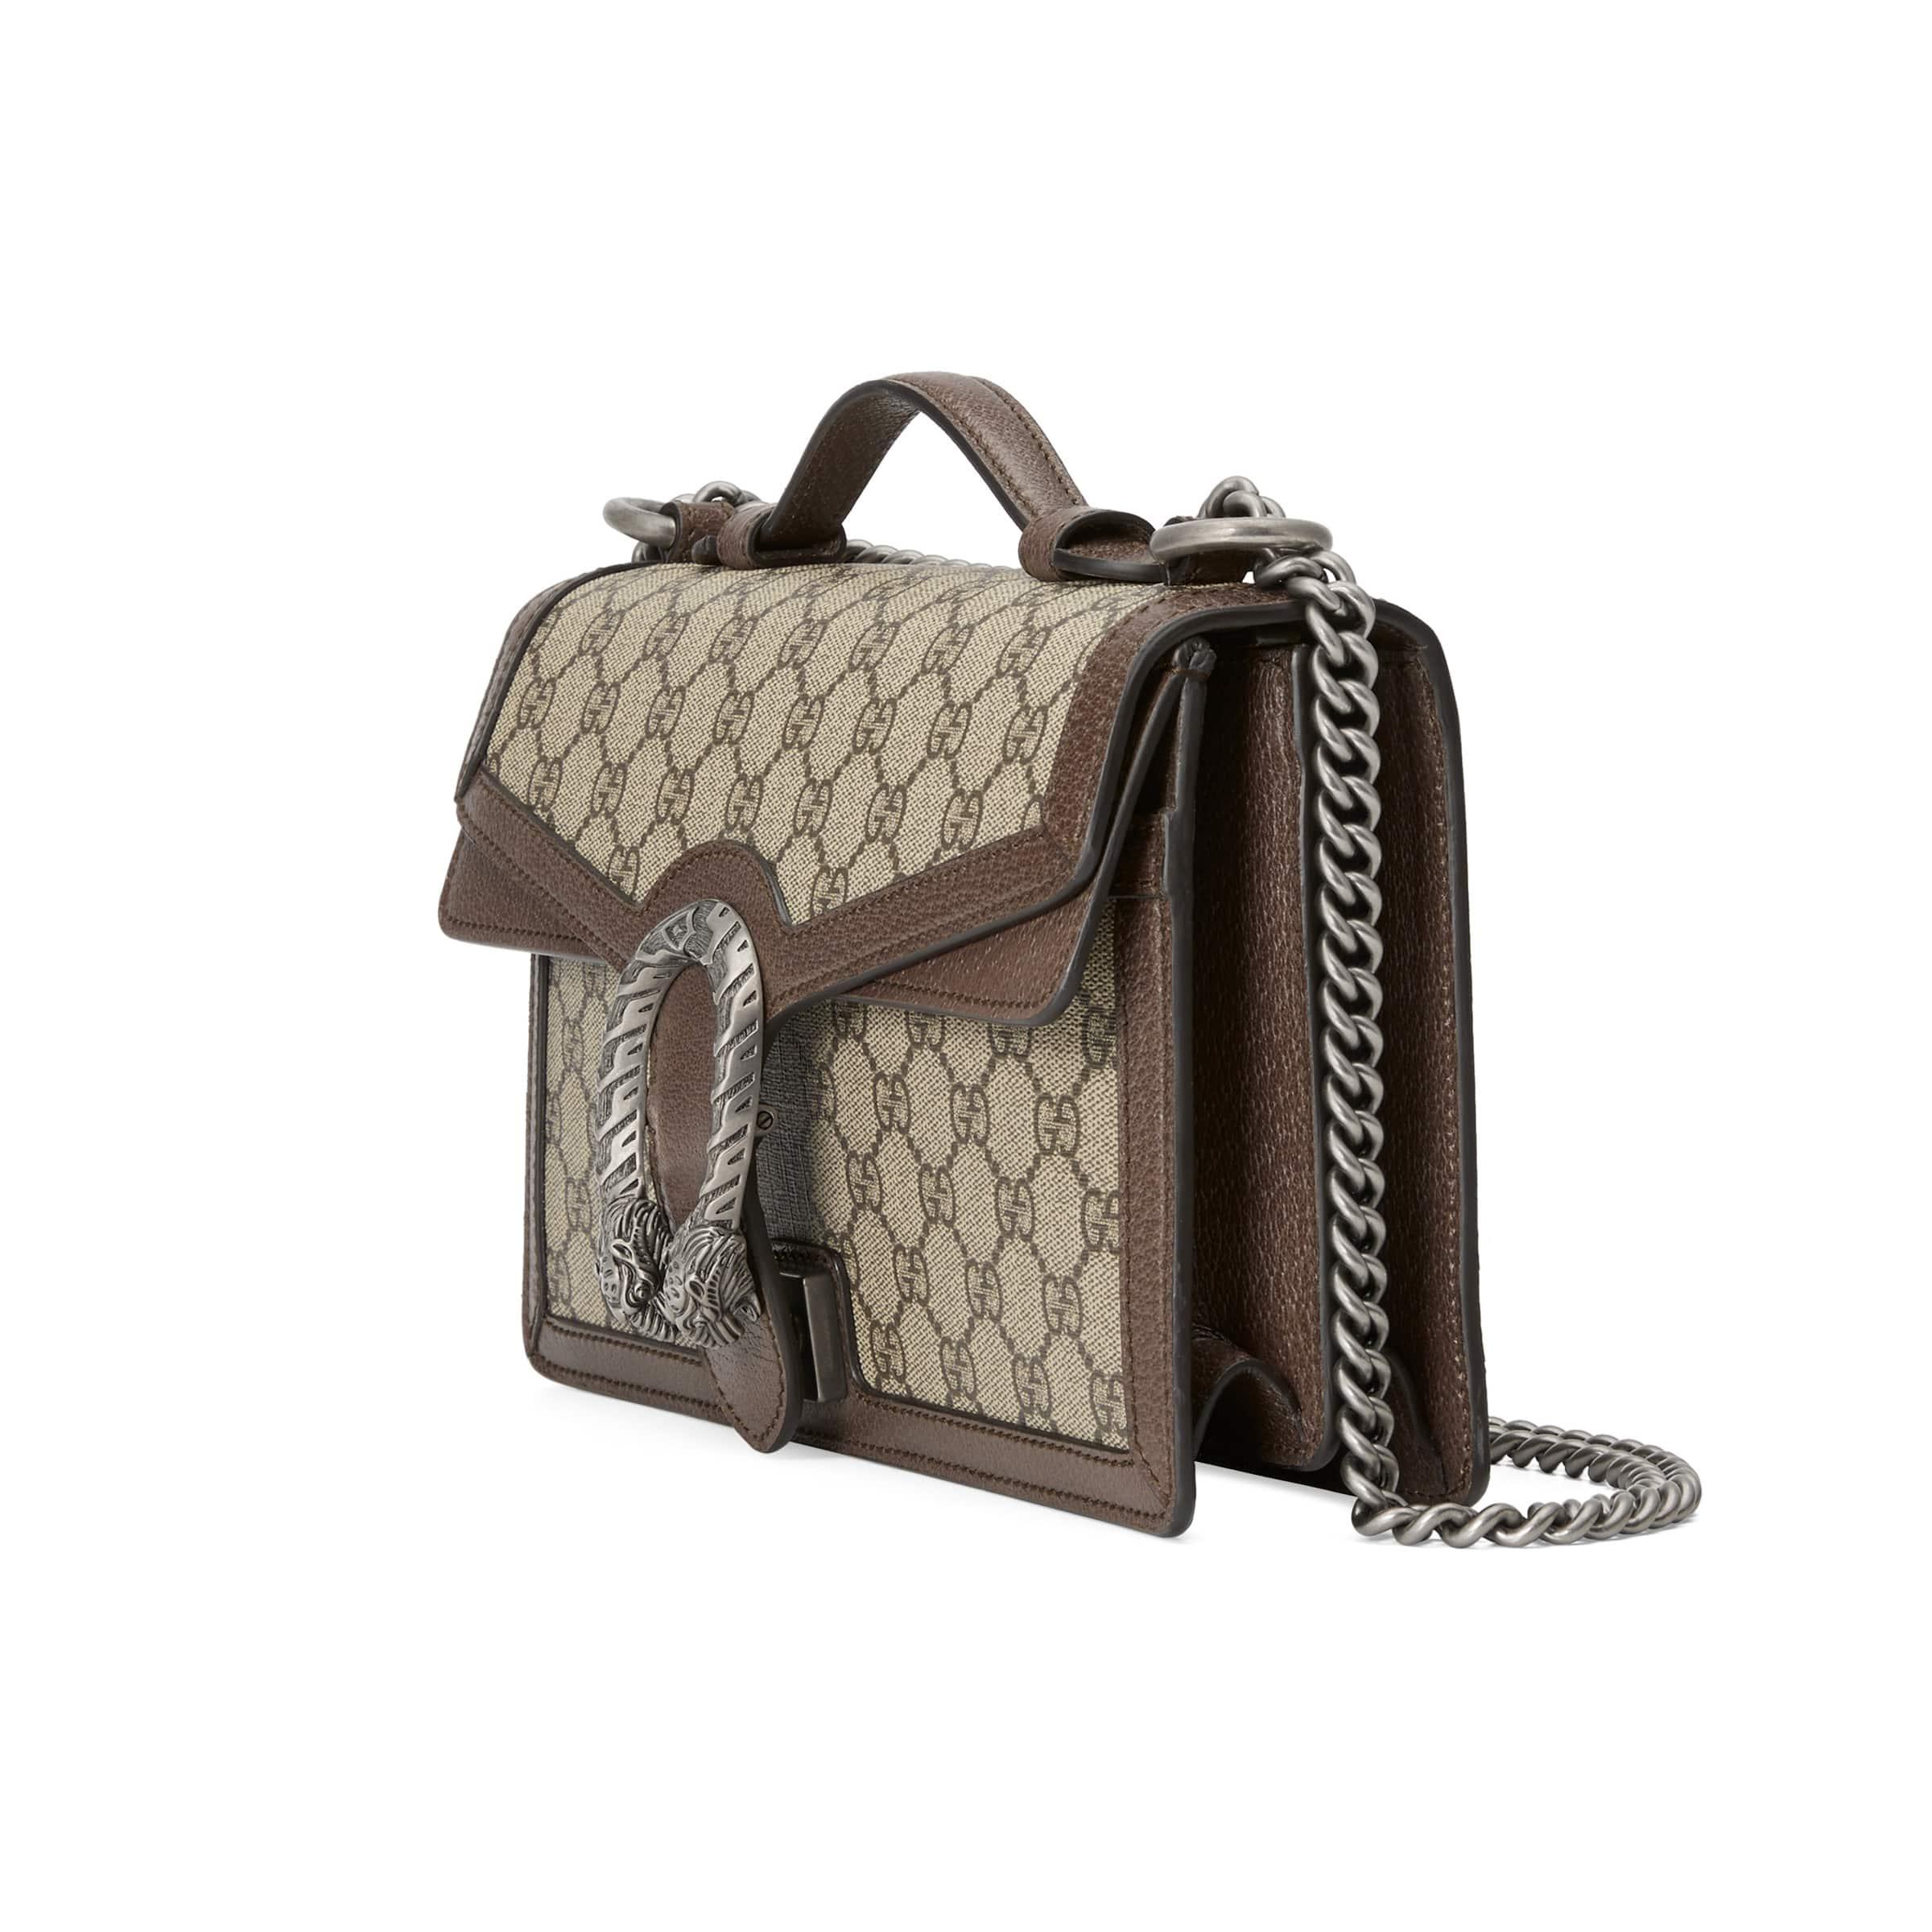 Gucci Canvas Dionysus gg Top Handle Bag in Brown/Beige (Natural) - Save 58%  | Lyst